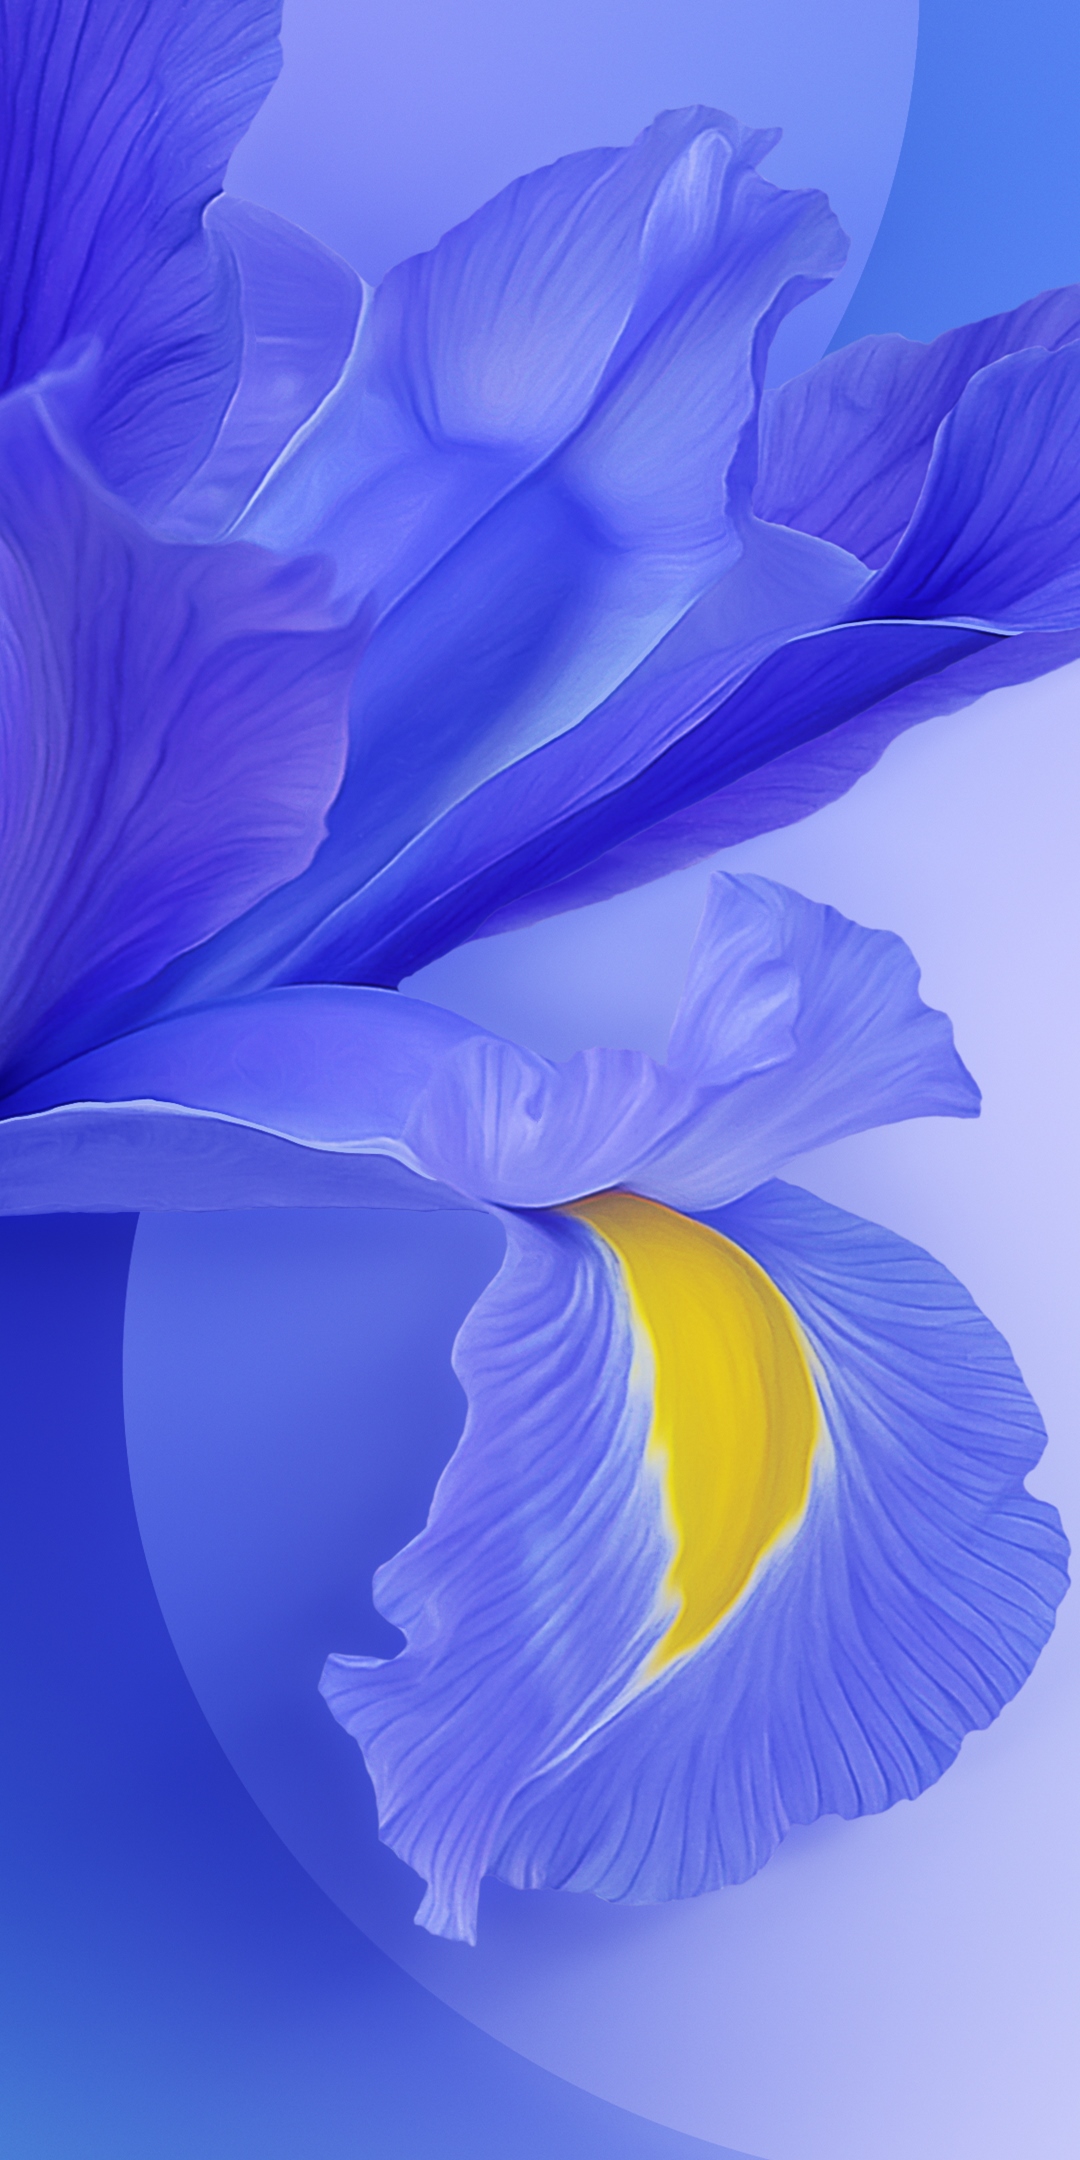  Download  Xiaomi  Mi 9 Wallpapers  to customize your old 